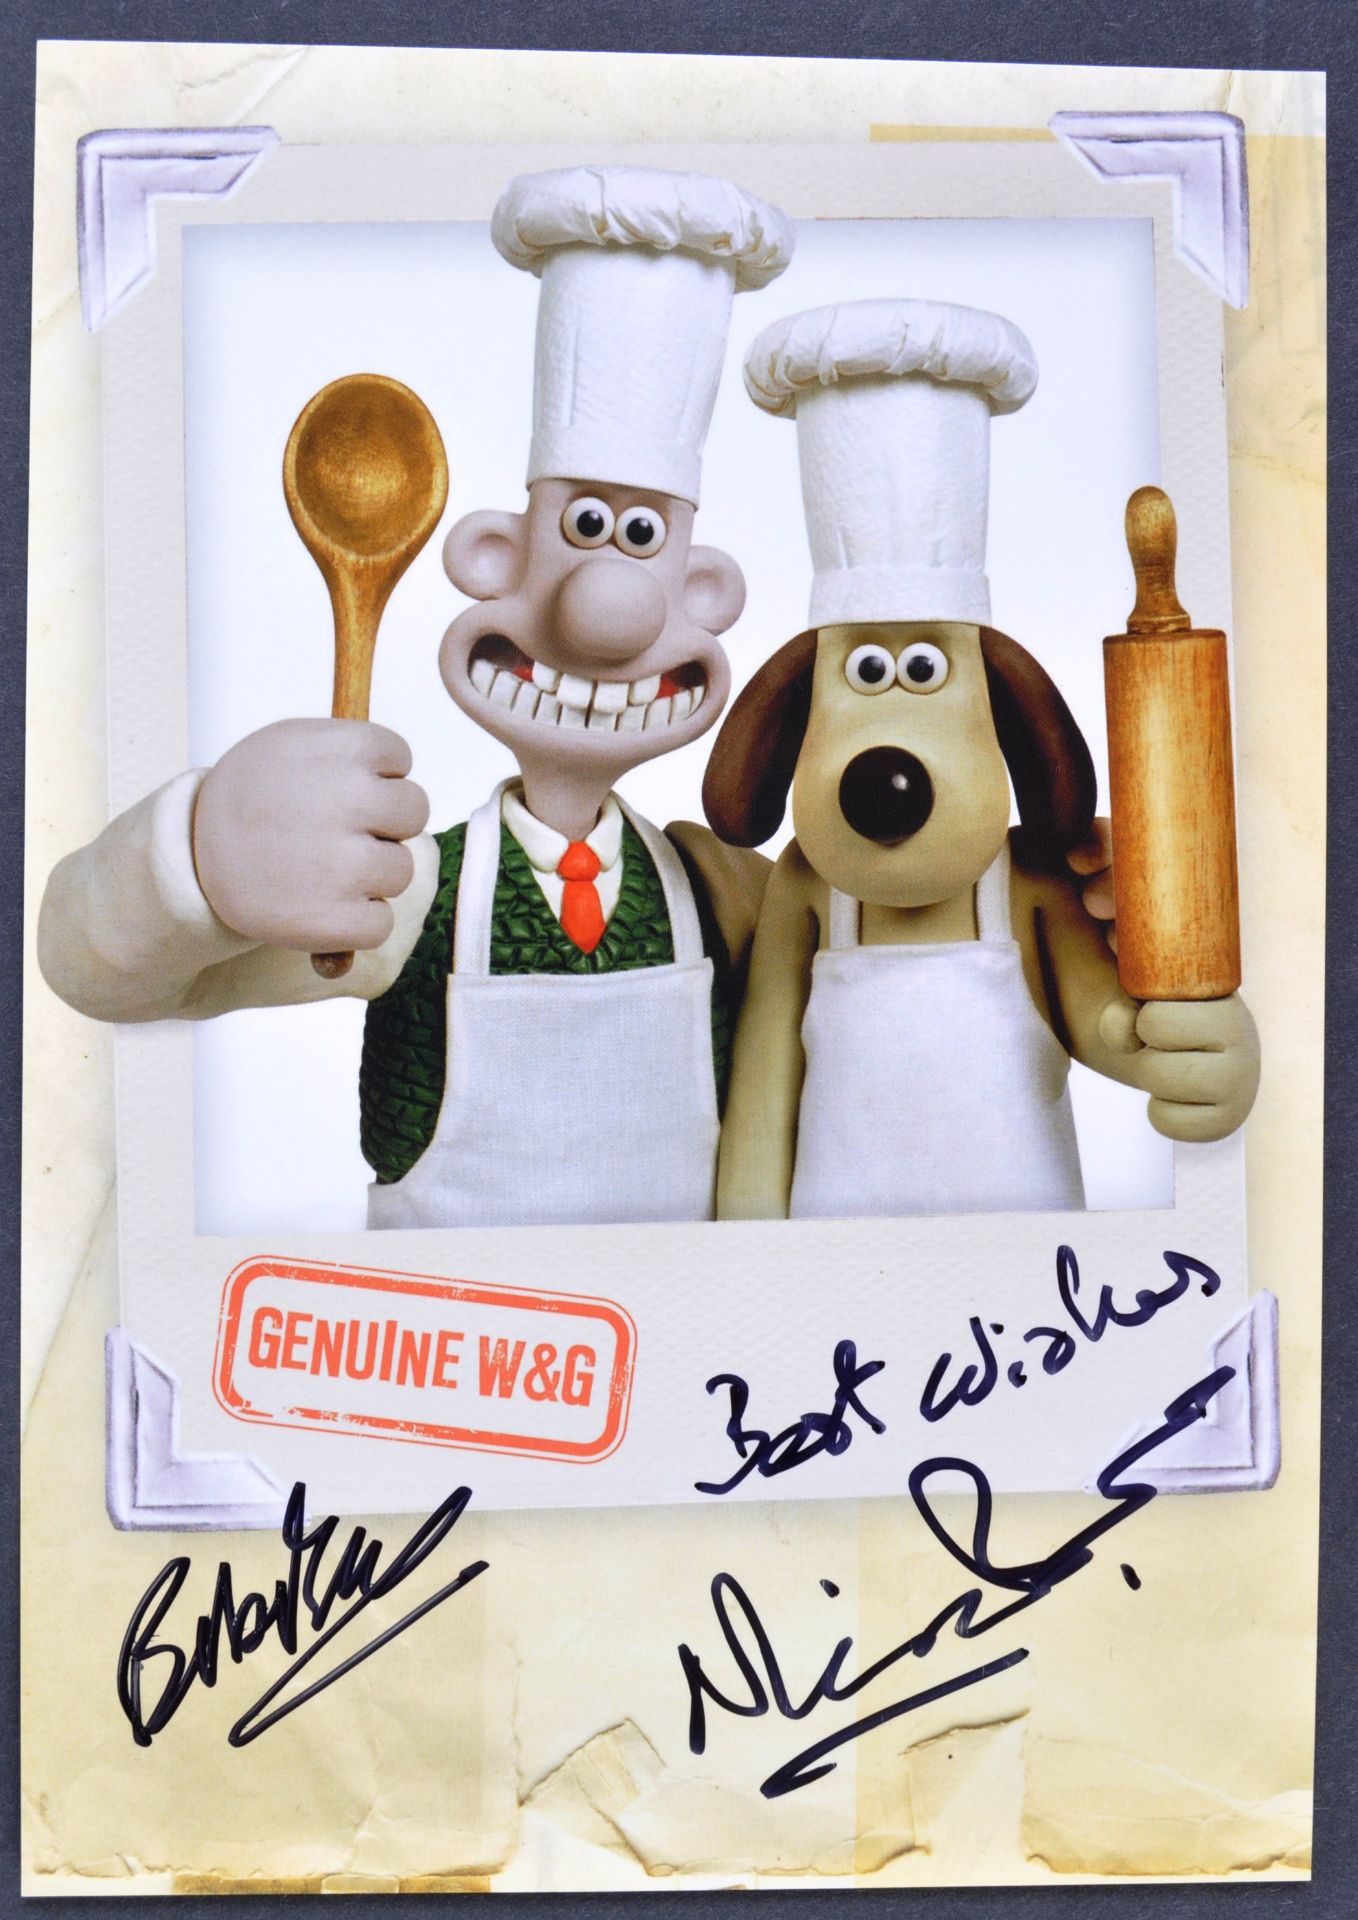 AARDMAN ANIMATIONS - MATTER OF LOAF & DEATH - DUAL SIGNED PHOTO